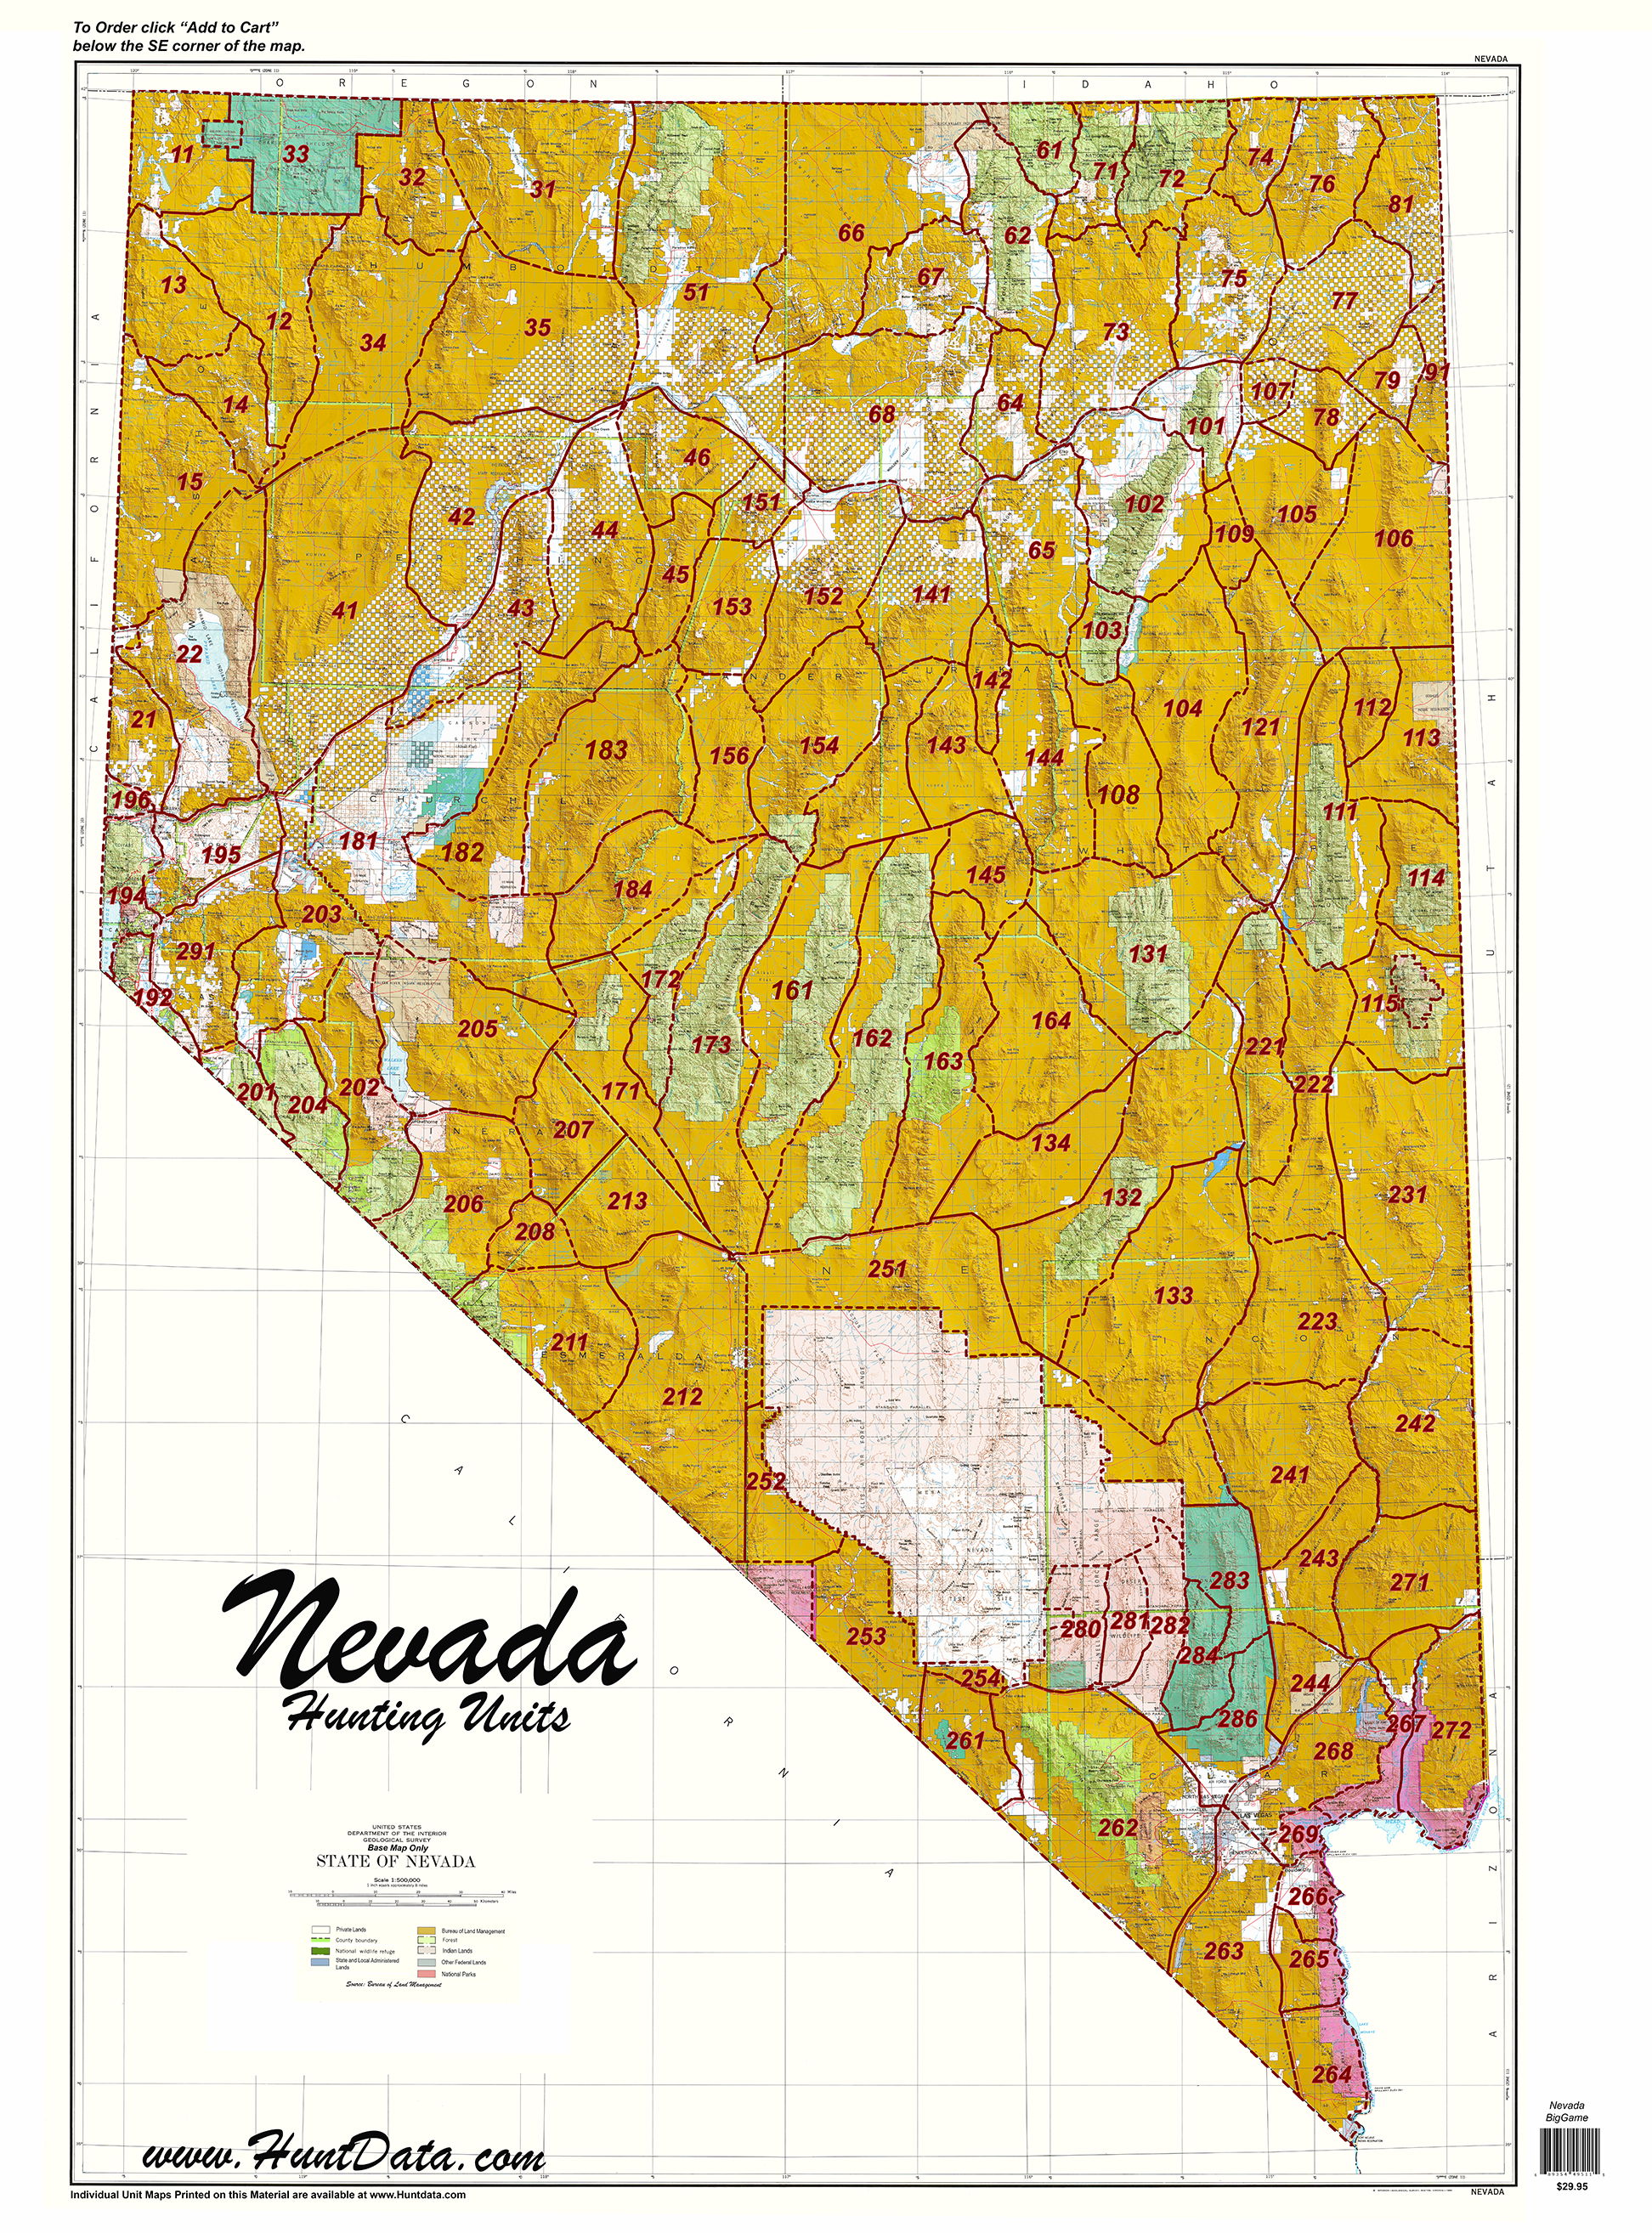 Nevada Statewide Unit Map